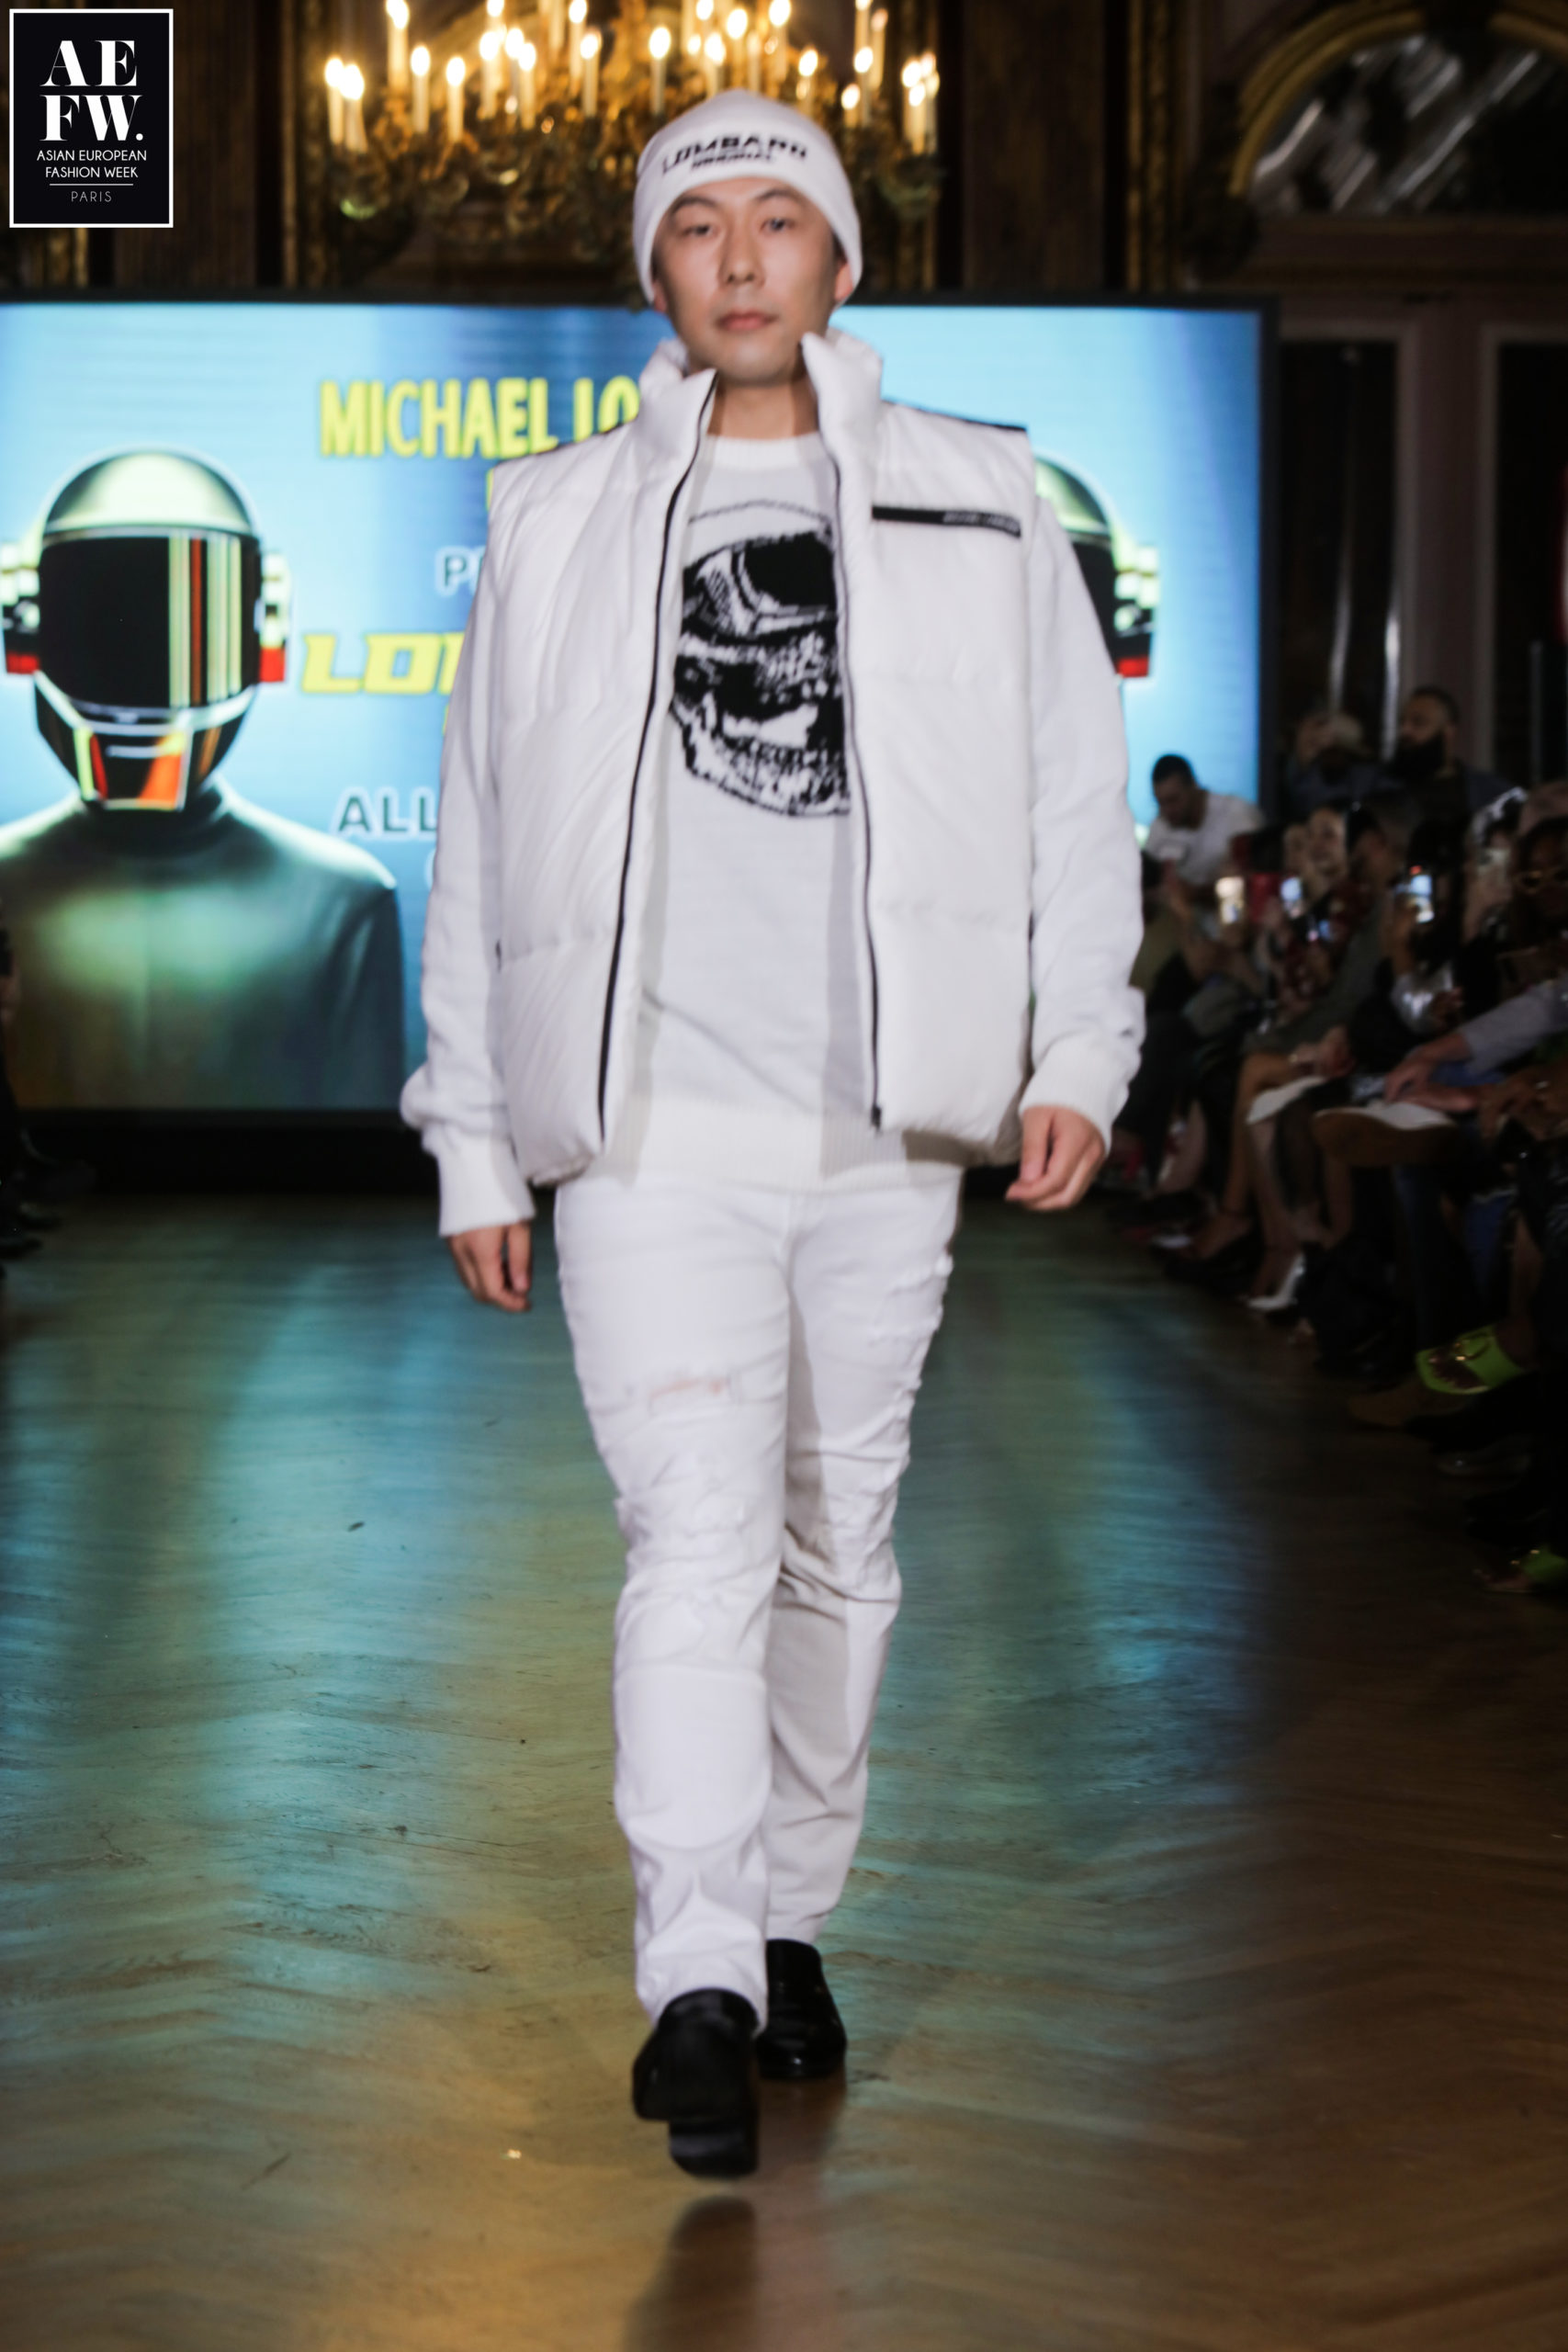 AEFW (Asian European Fashion Week) - MICHAEL LOMBARD - The King of Leather - PFW SS24  -WEST IN PARIS-VENDOME - Organizer by Rex Fernando - Producer WOULD BEAUTY INNOVATIONS - Sponsored by MIRAISE International representing BIMORE 